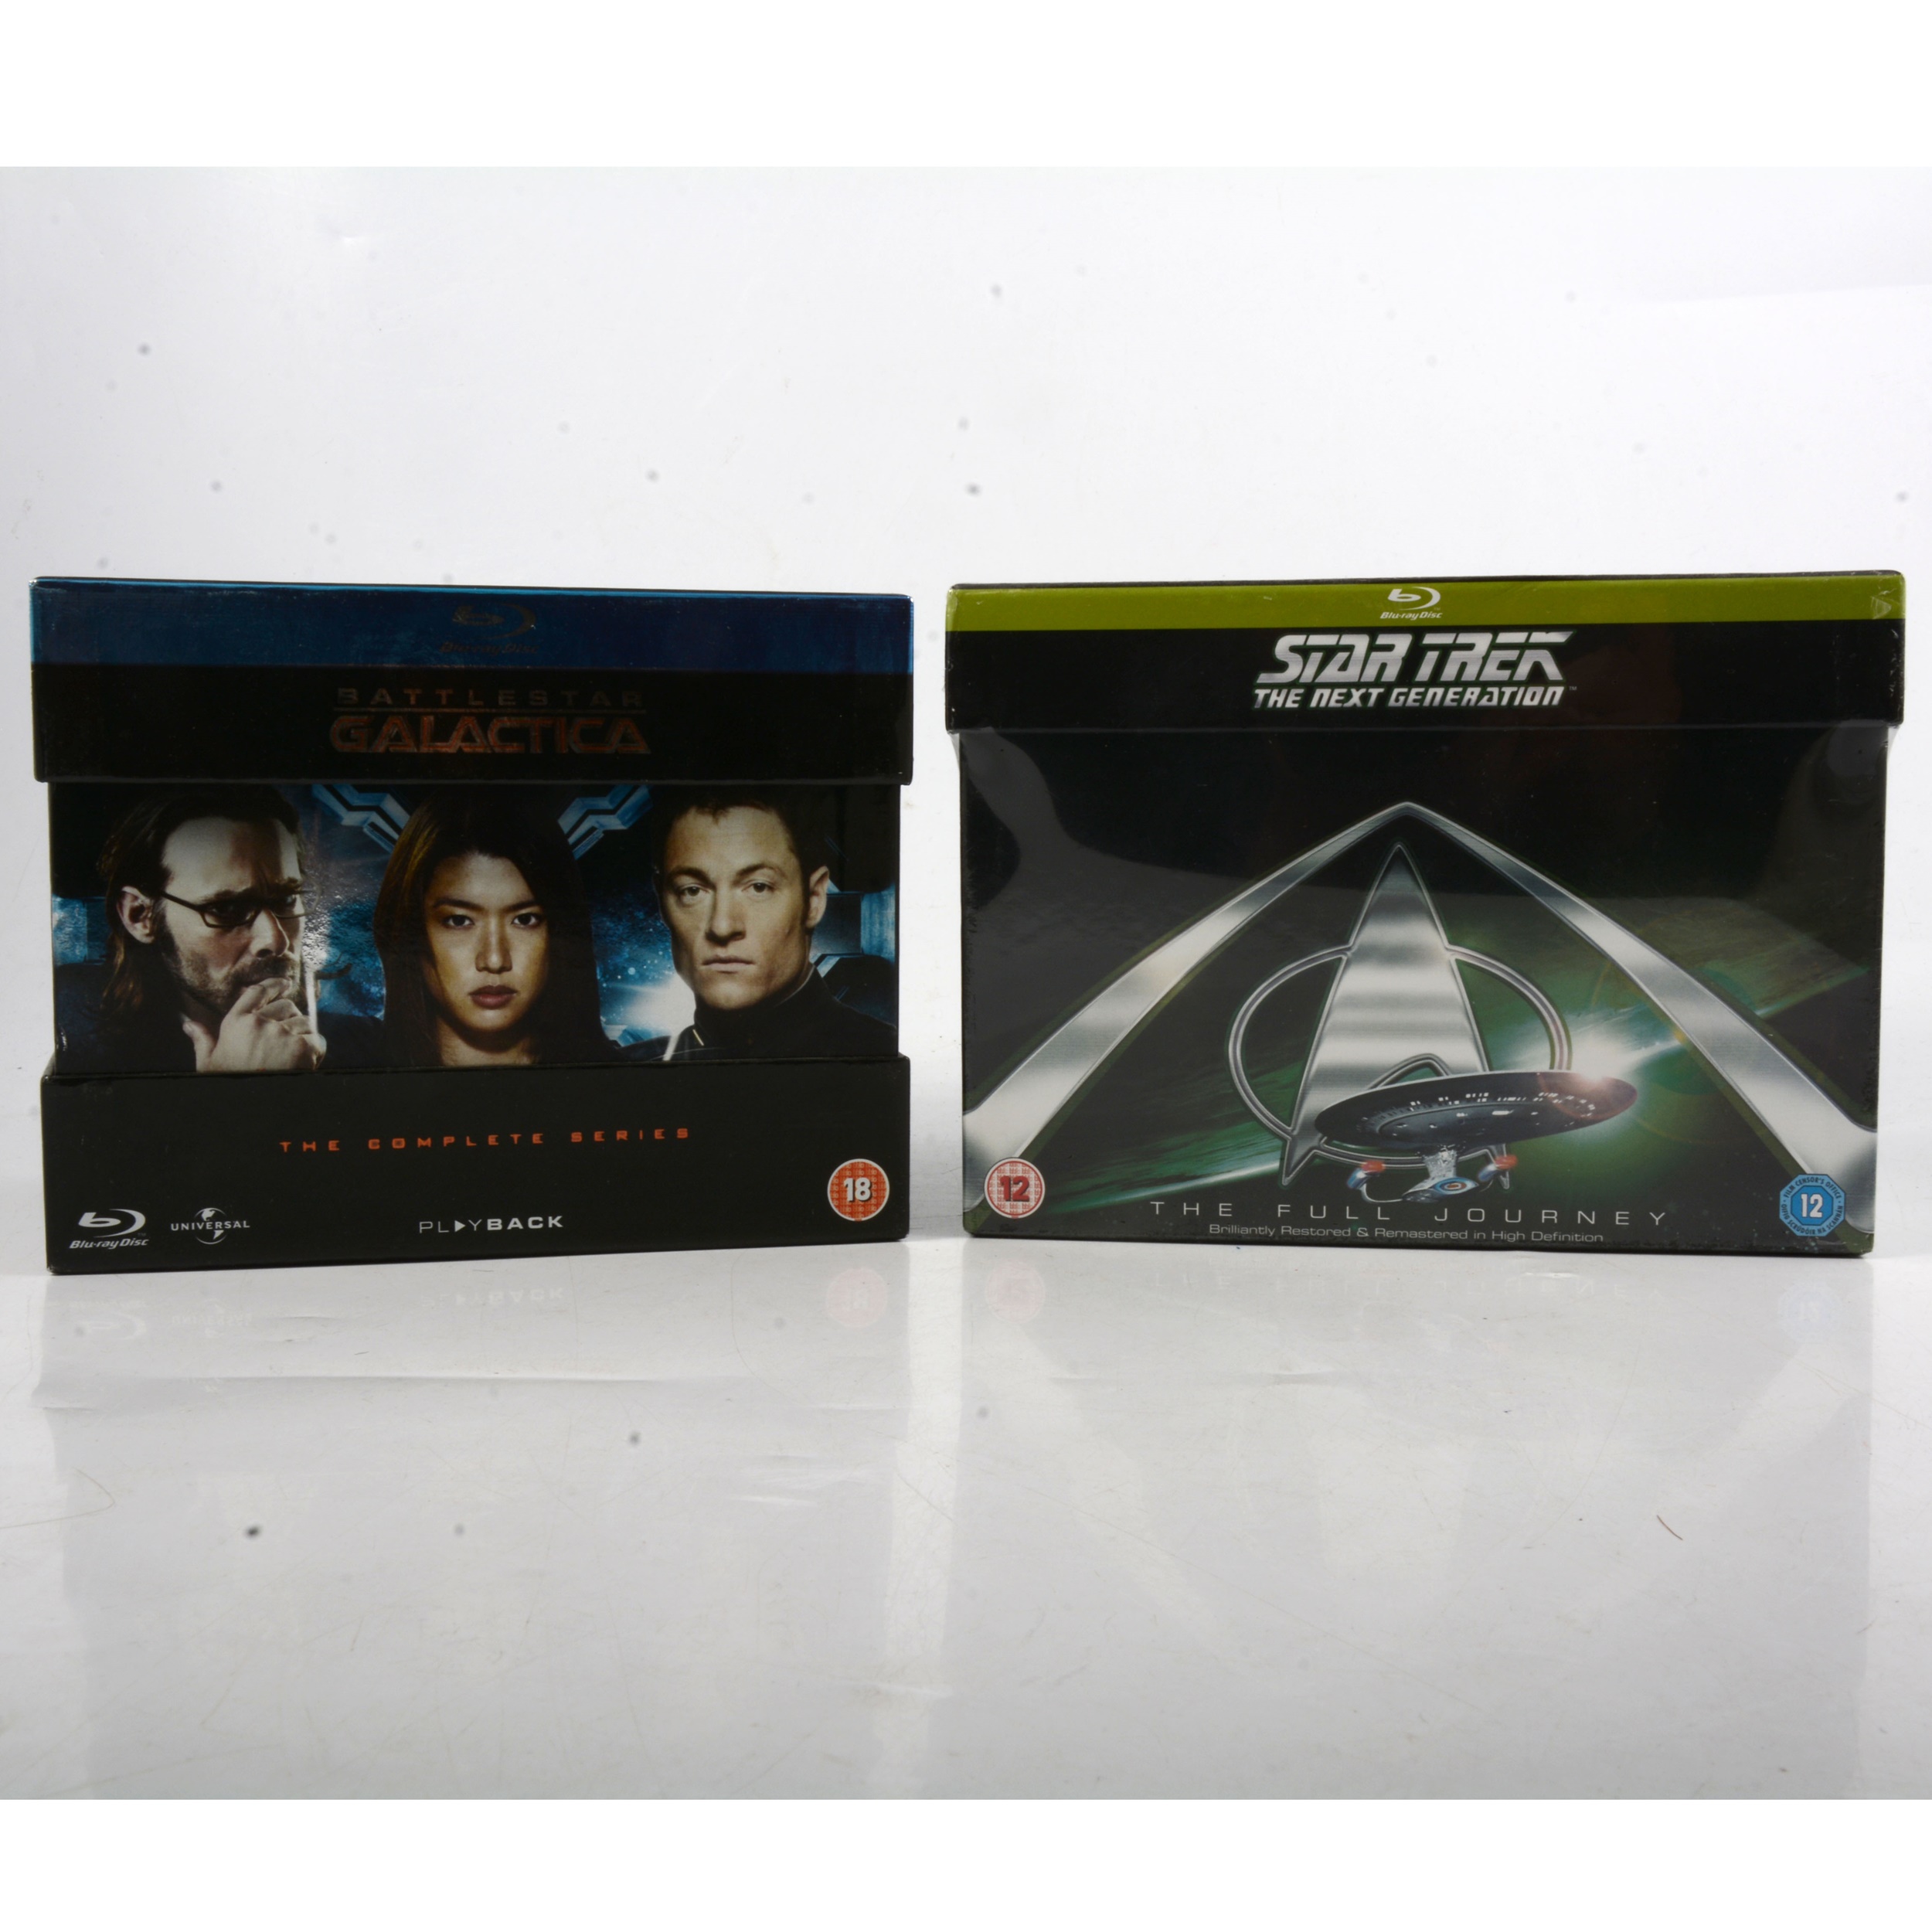 Large quantity of Blu-ray TV series box sets, approx 100, including Star Trek - Image 3 of 3